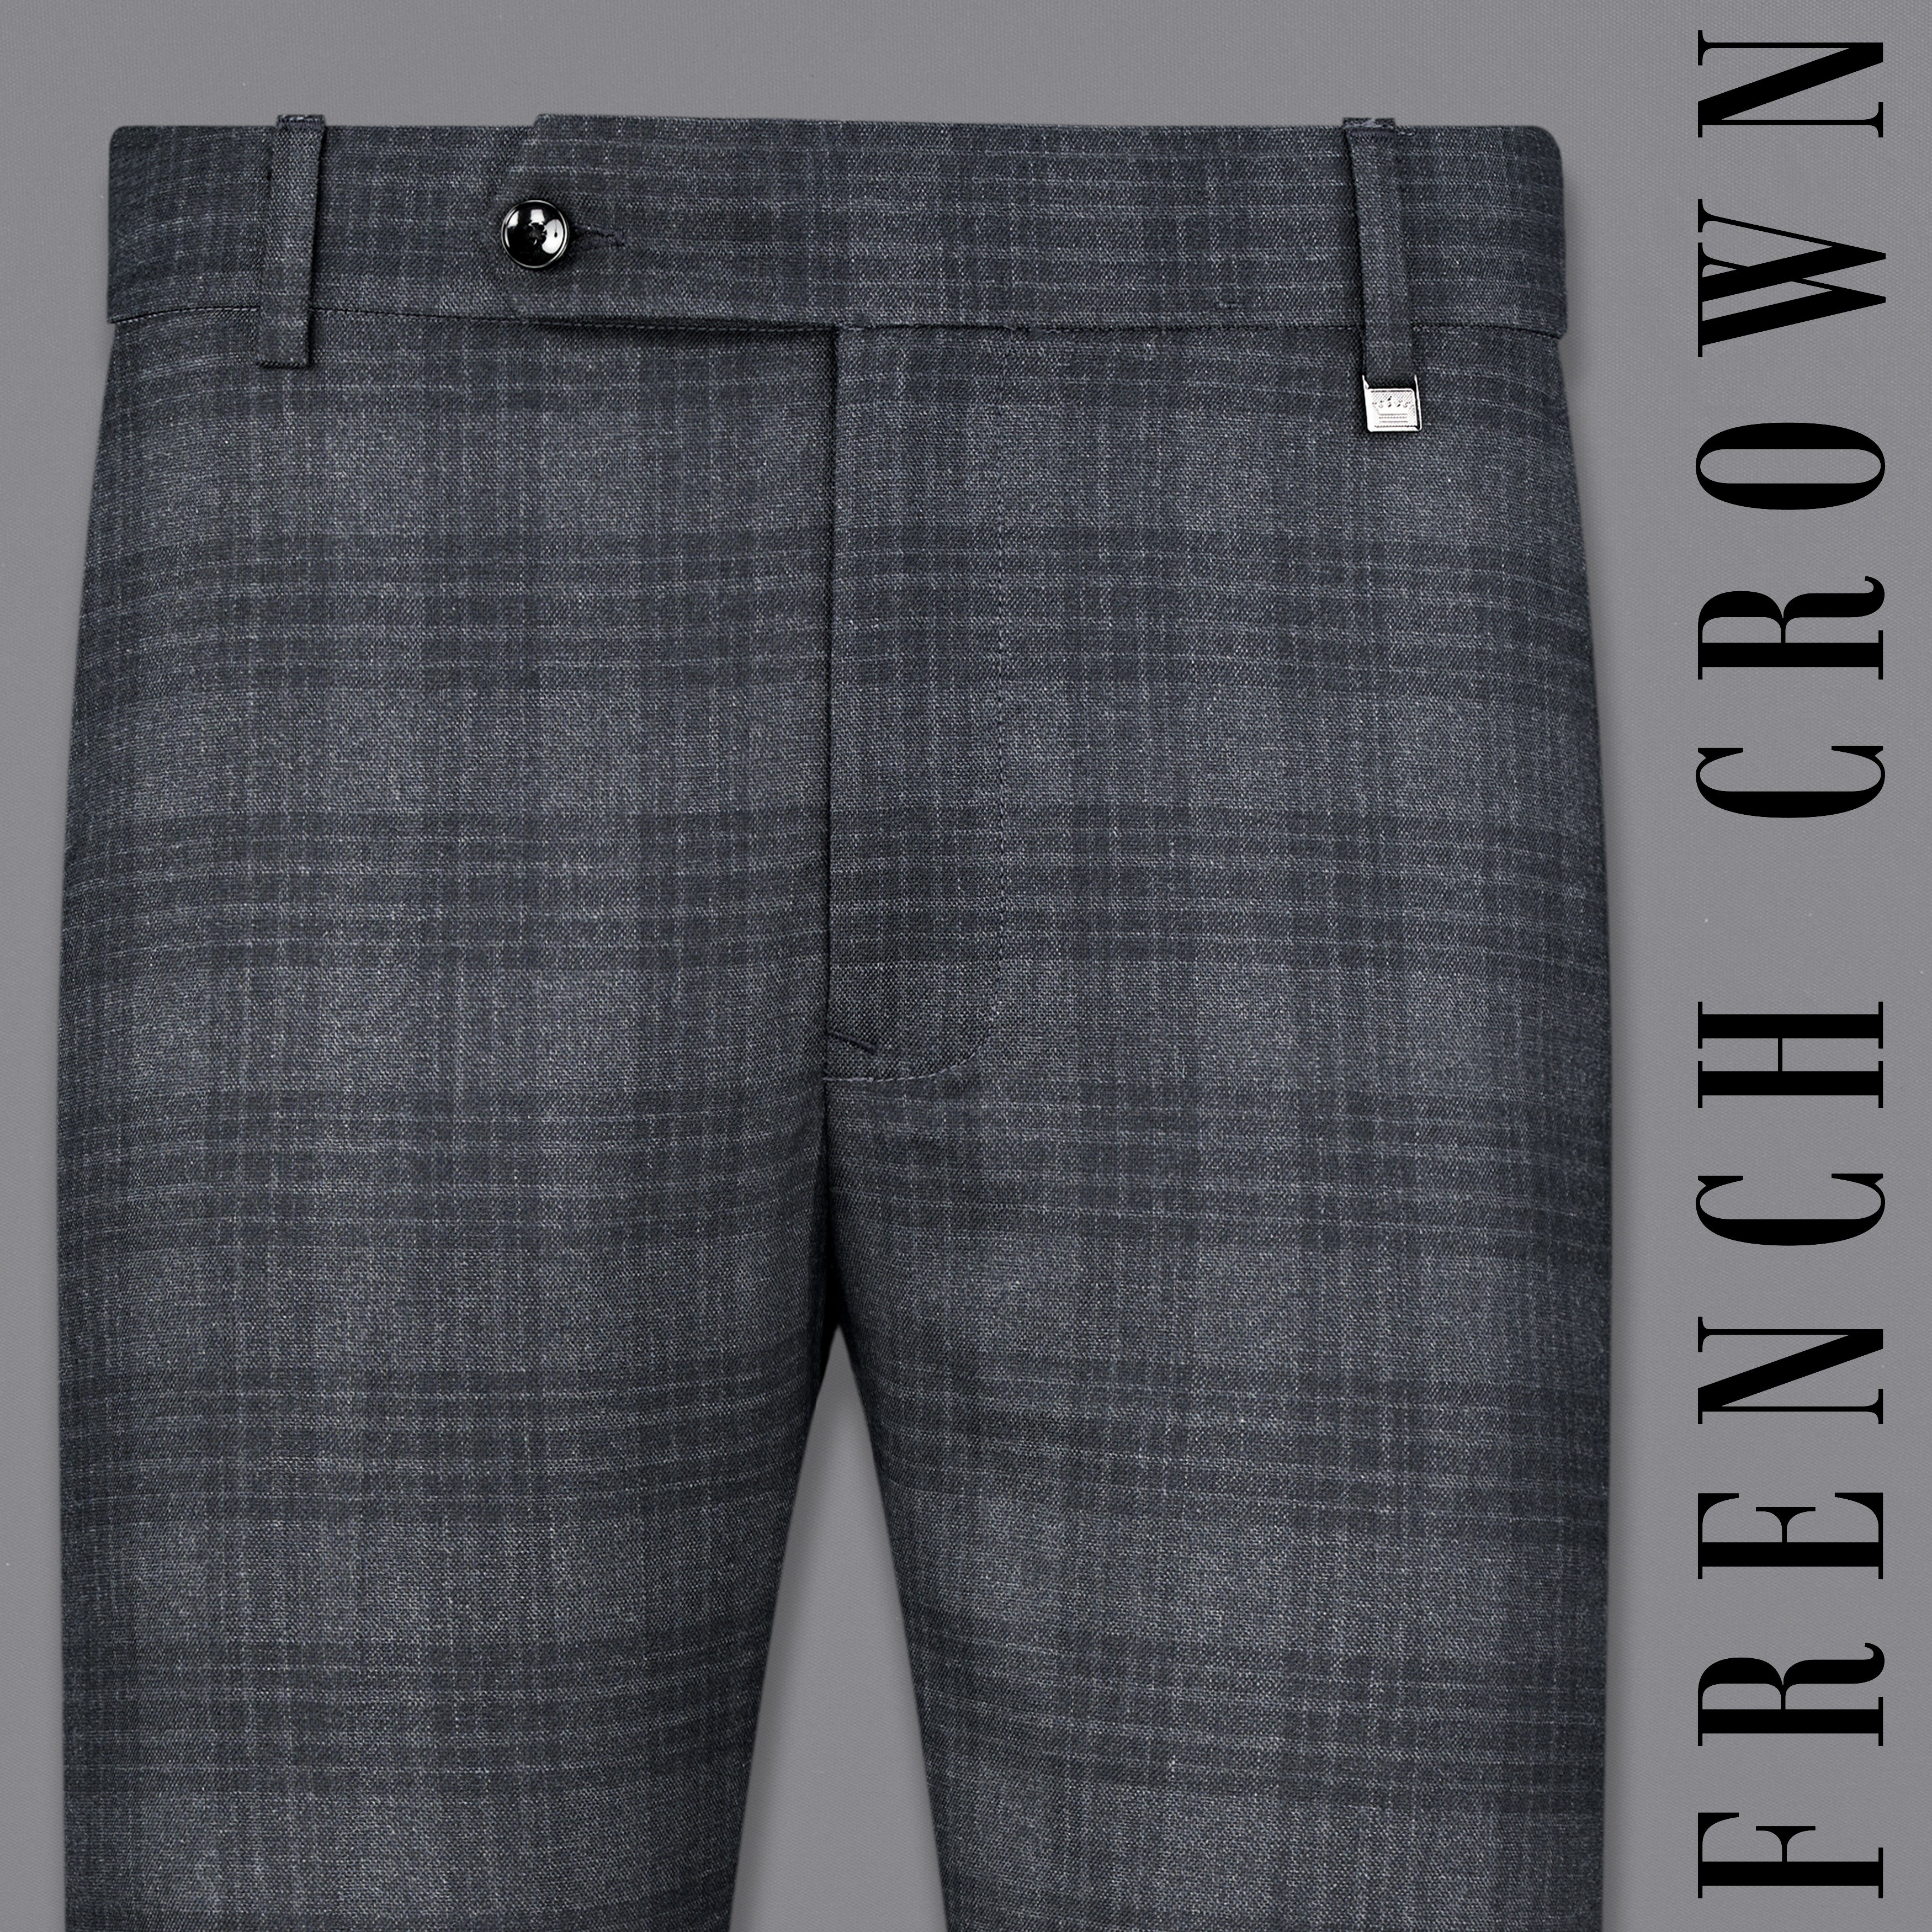 Grey plaid checkered pant for gentleman in 2018 | Plaid pants outfit, Pants  outfit men, Mens plaid pants